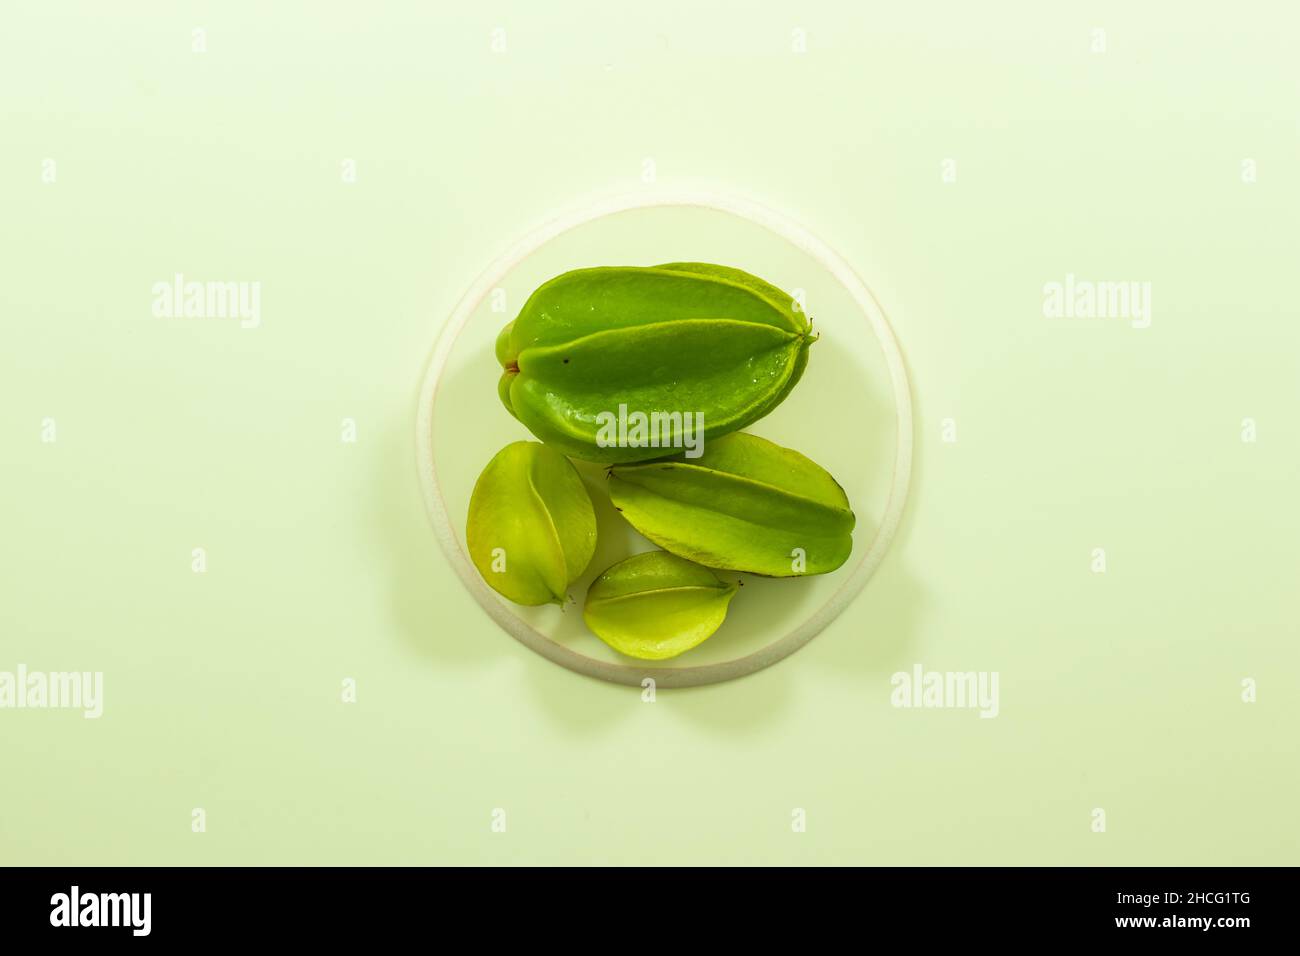 Carambola fruit when ripe or star fruit with tinges of light green Stock Photo